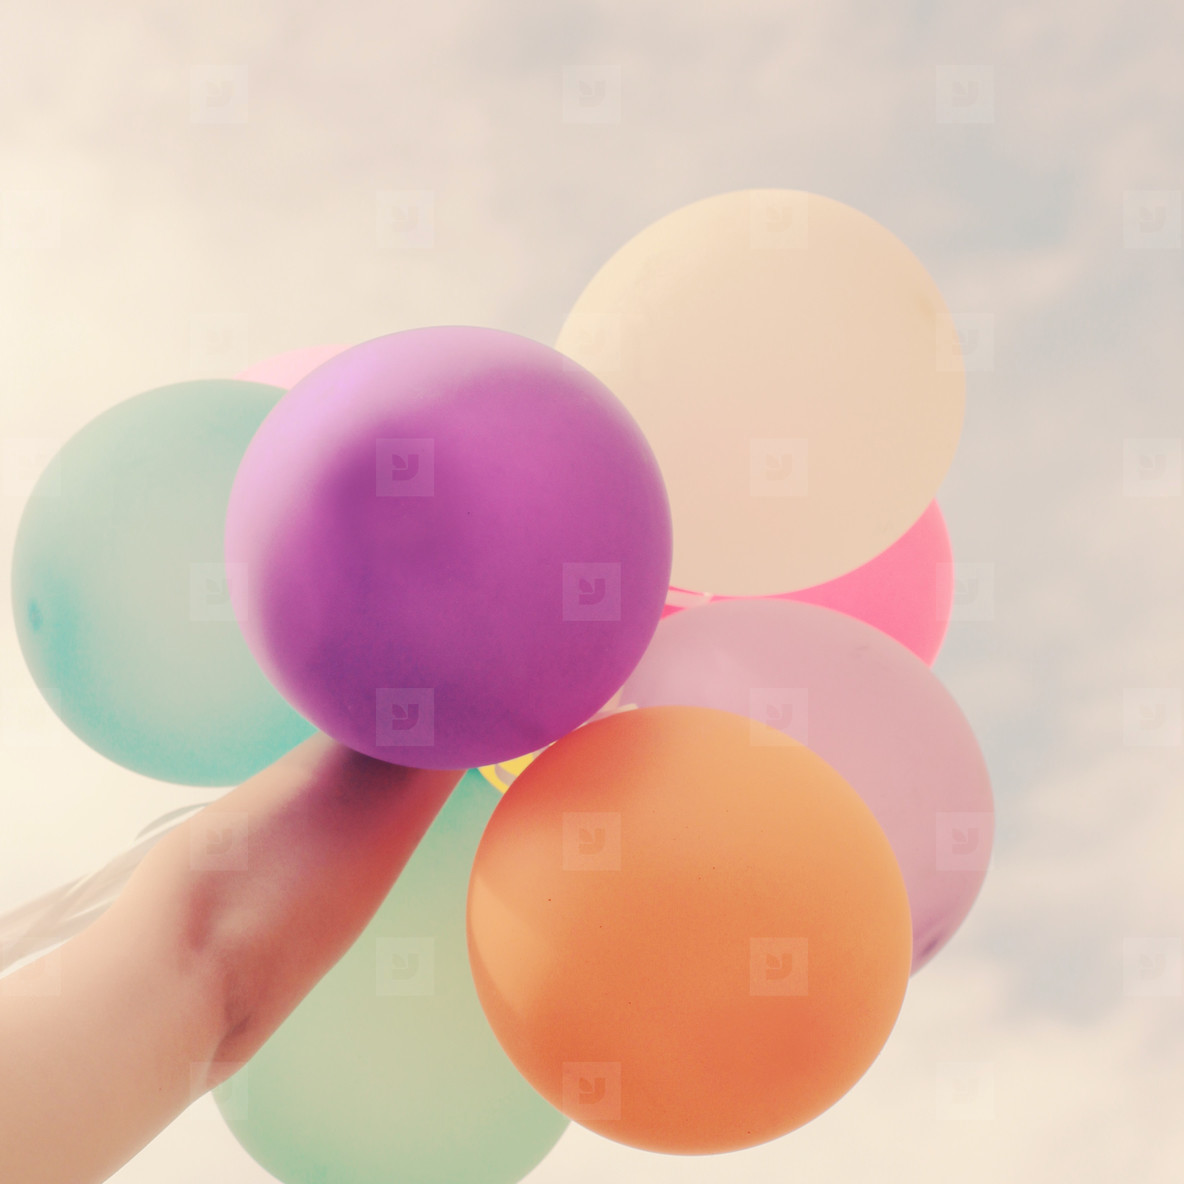 Hand holding balloons